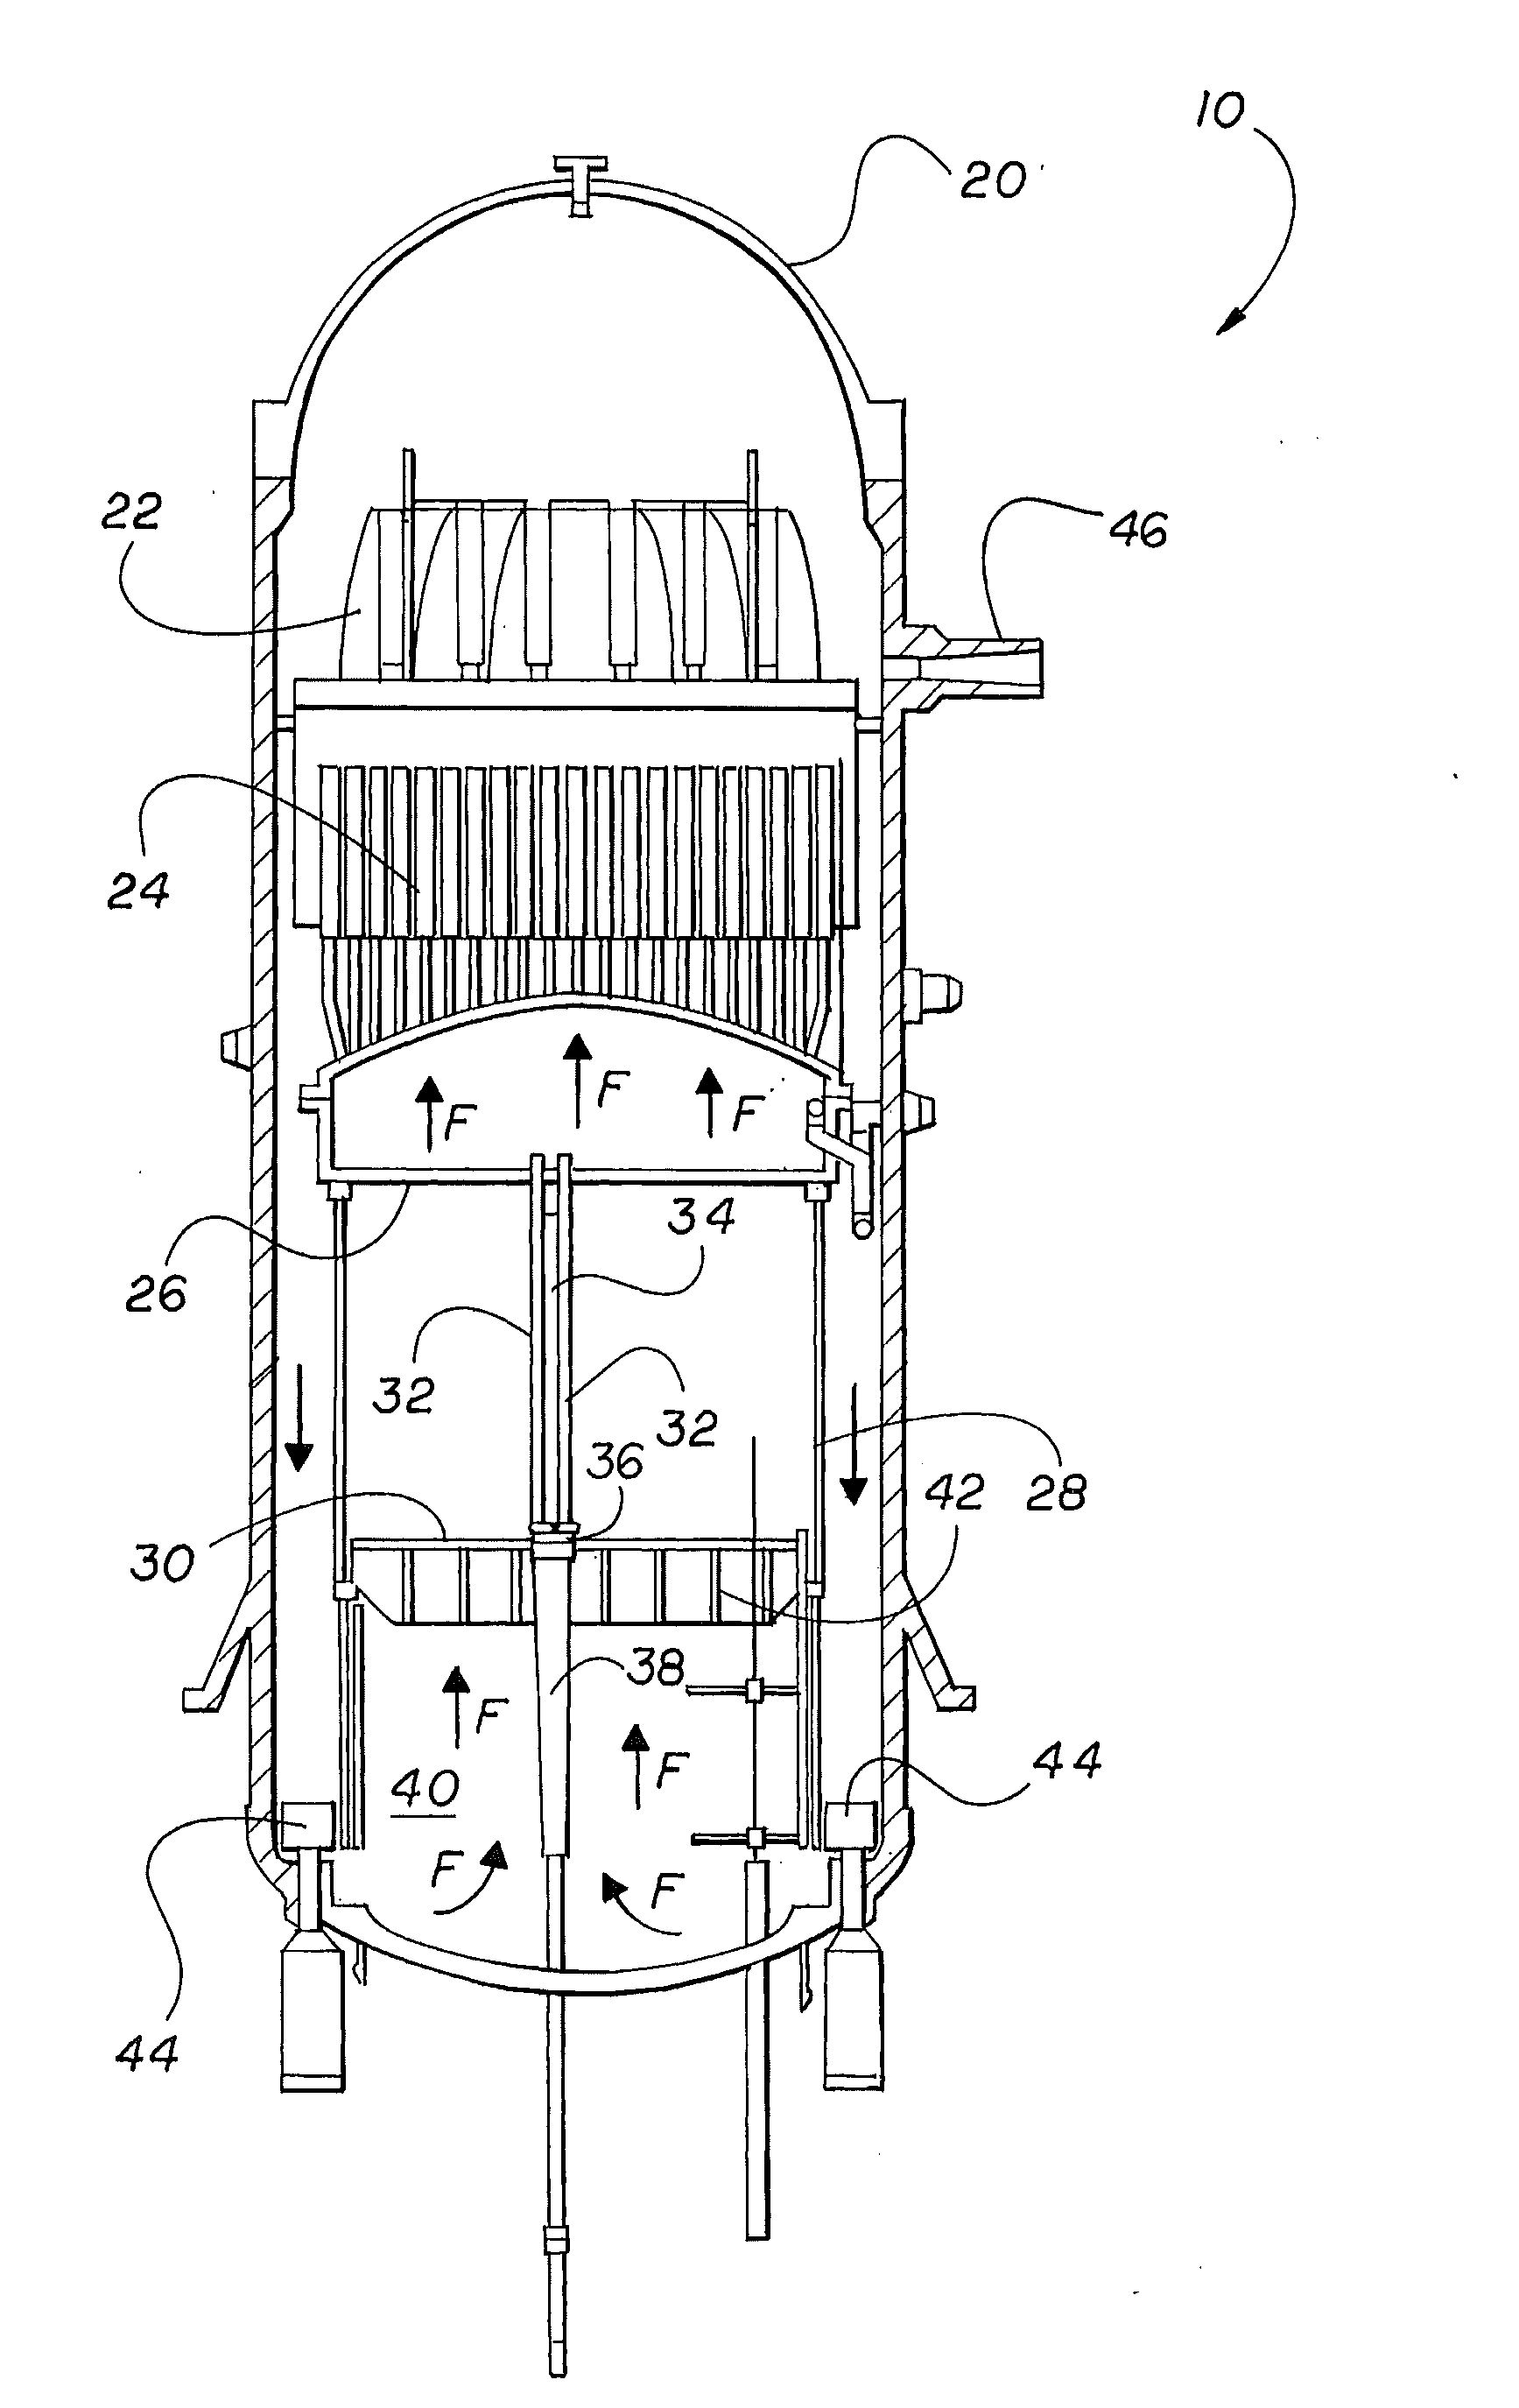 Debris Exclusion and Retention Device for a Fuel Assembly